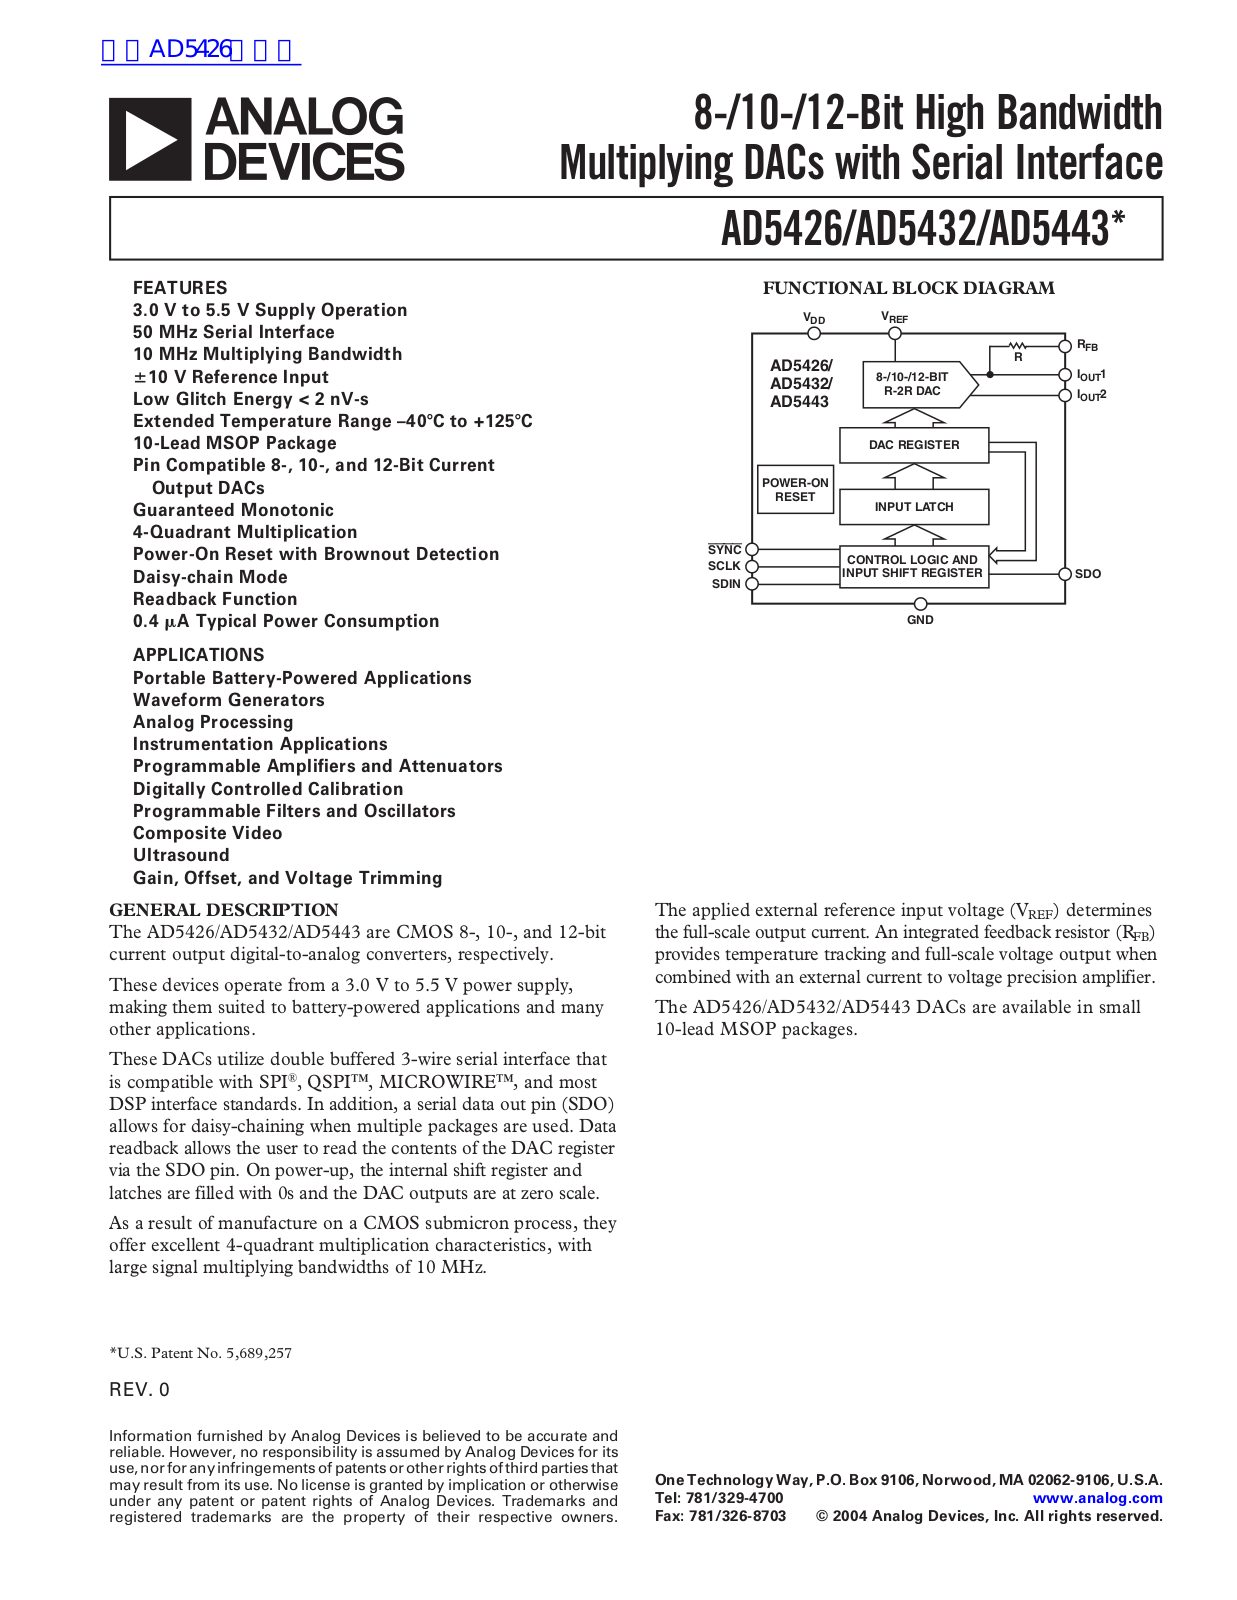 ANALOG DEVICES AD5426, AD5432, AD5443 Service Manual